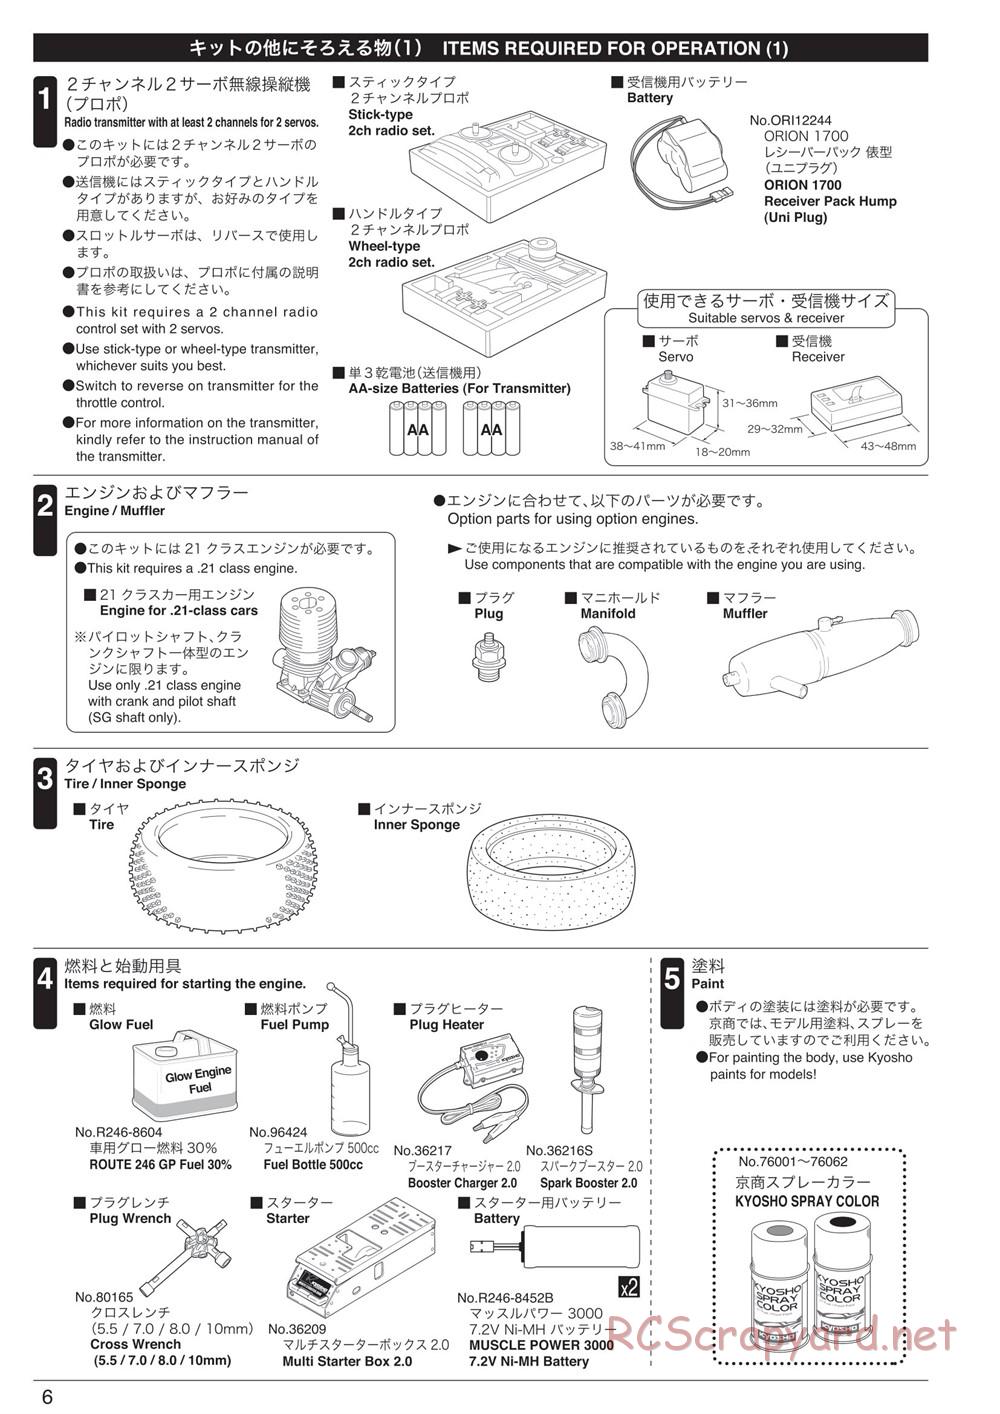 Kyosho - Inferno MP9 TKI4 10th Anniversary Special Edition - Manual - Page 6